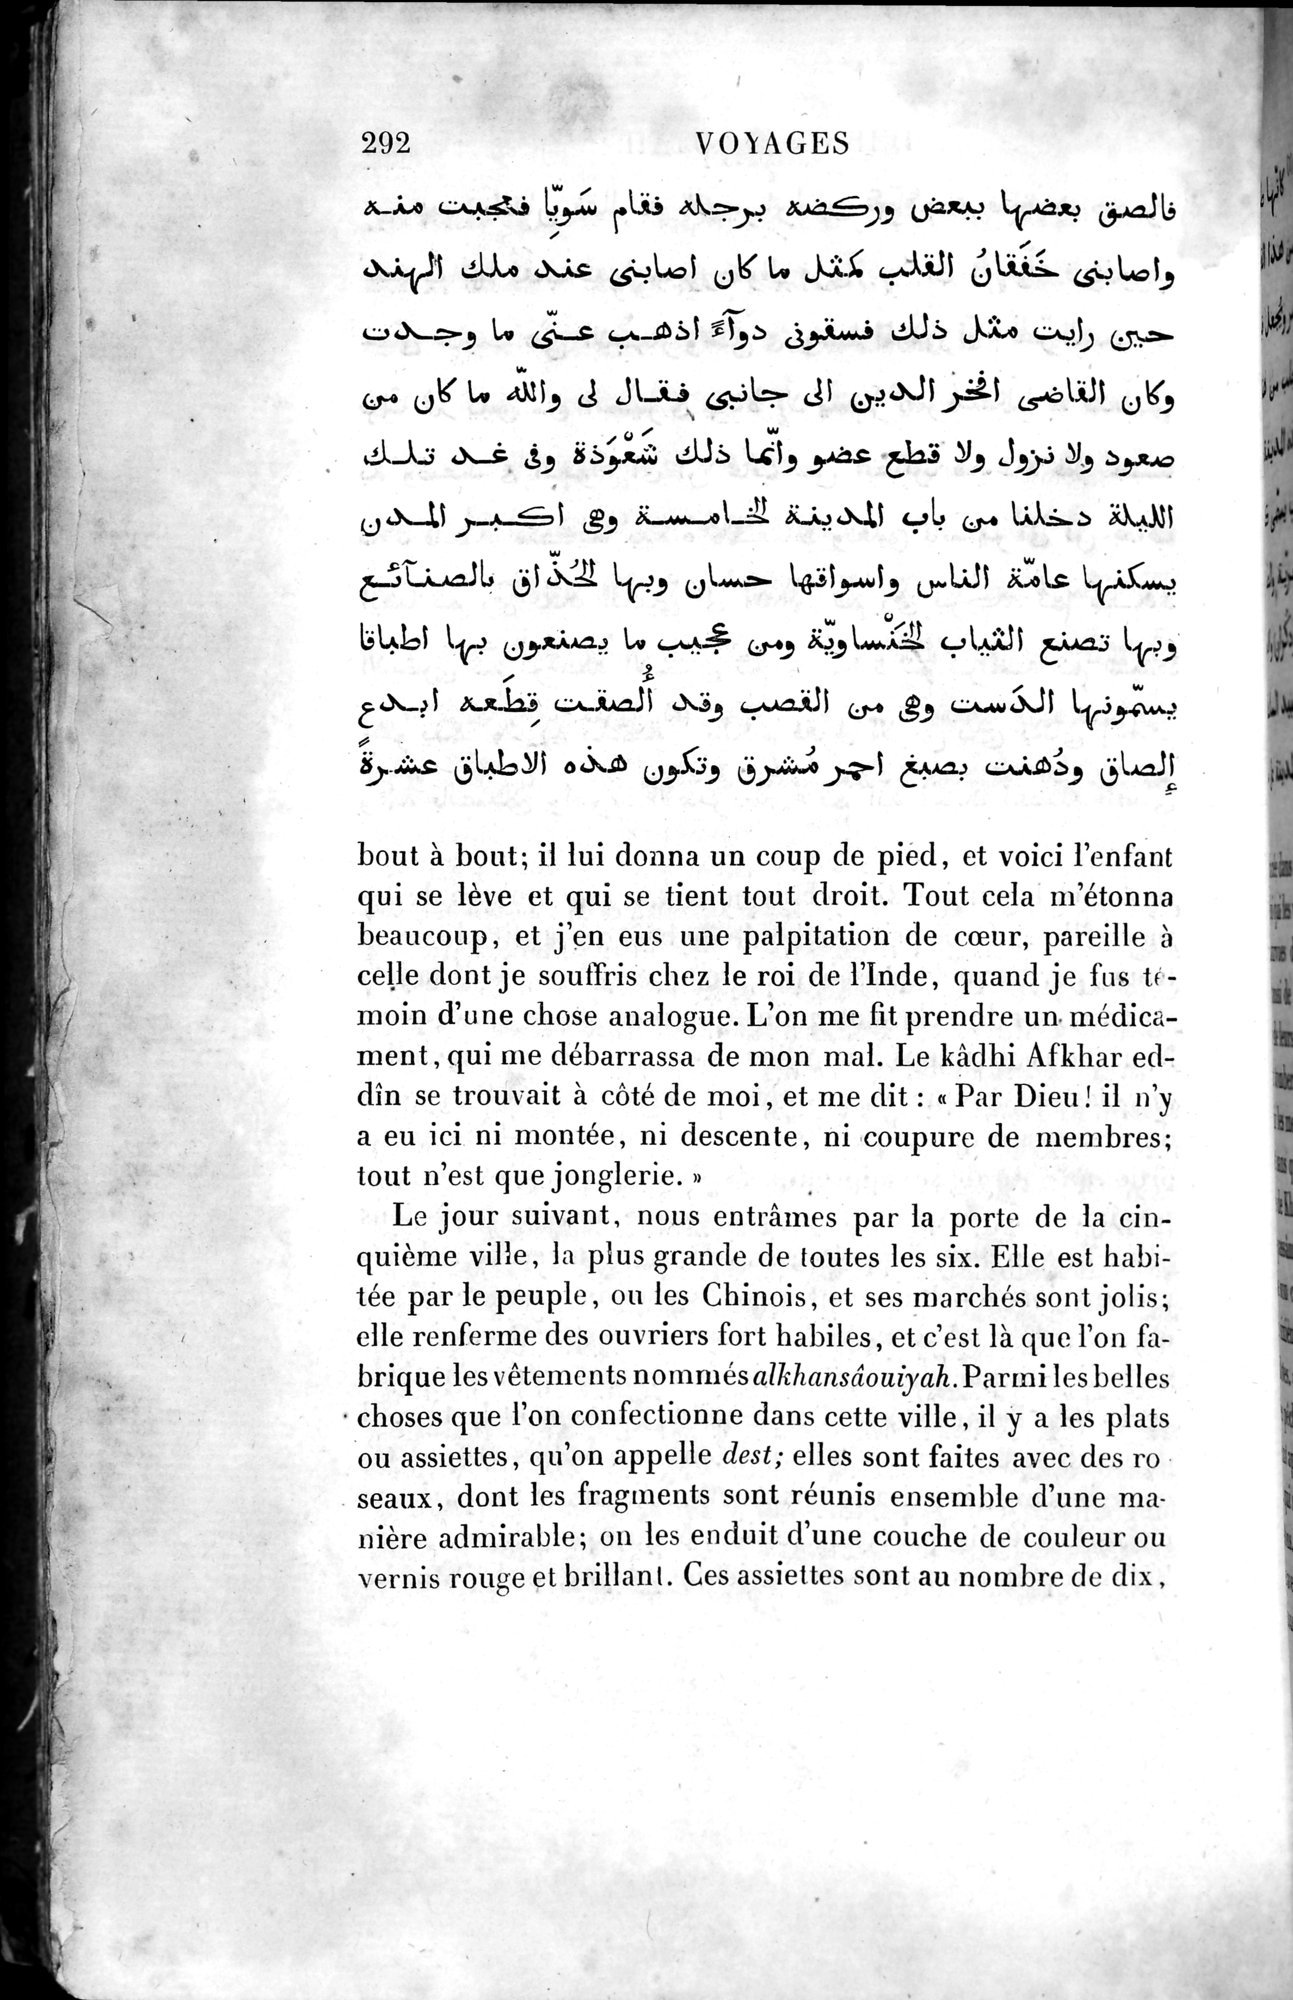 Voyages d'Ibn Batoutah : vol.4 / Page 304 (Grayscale High Resolution Image)